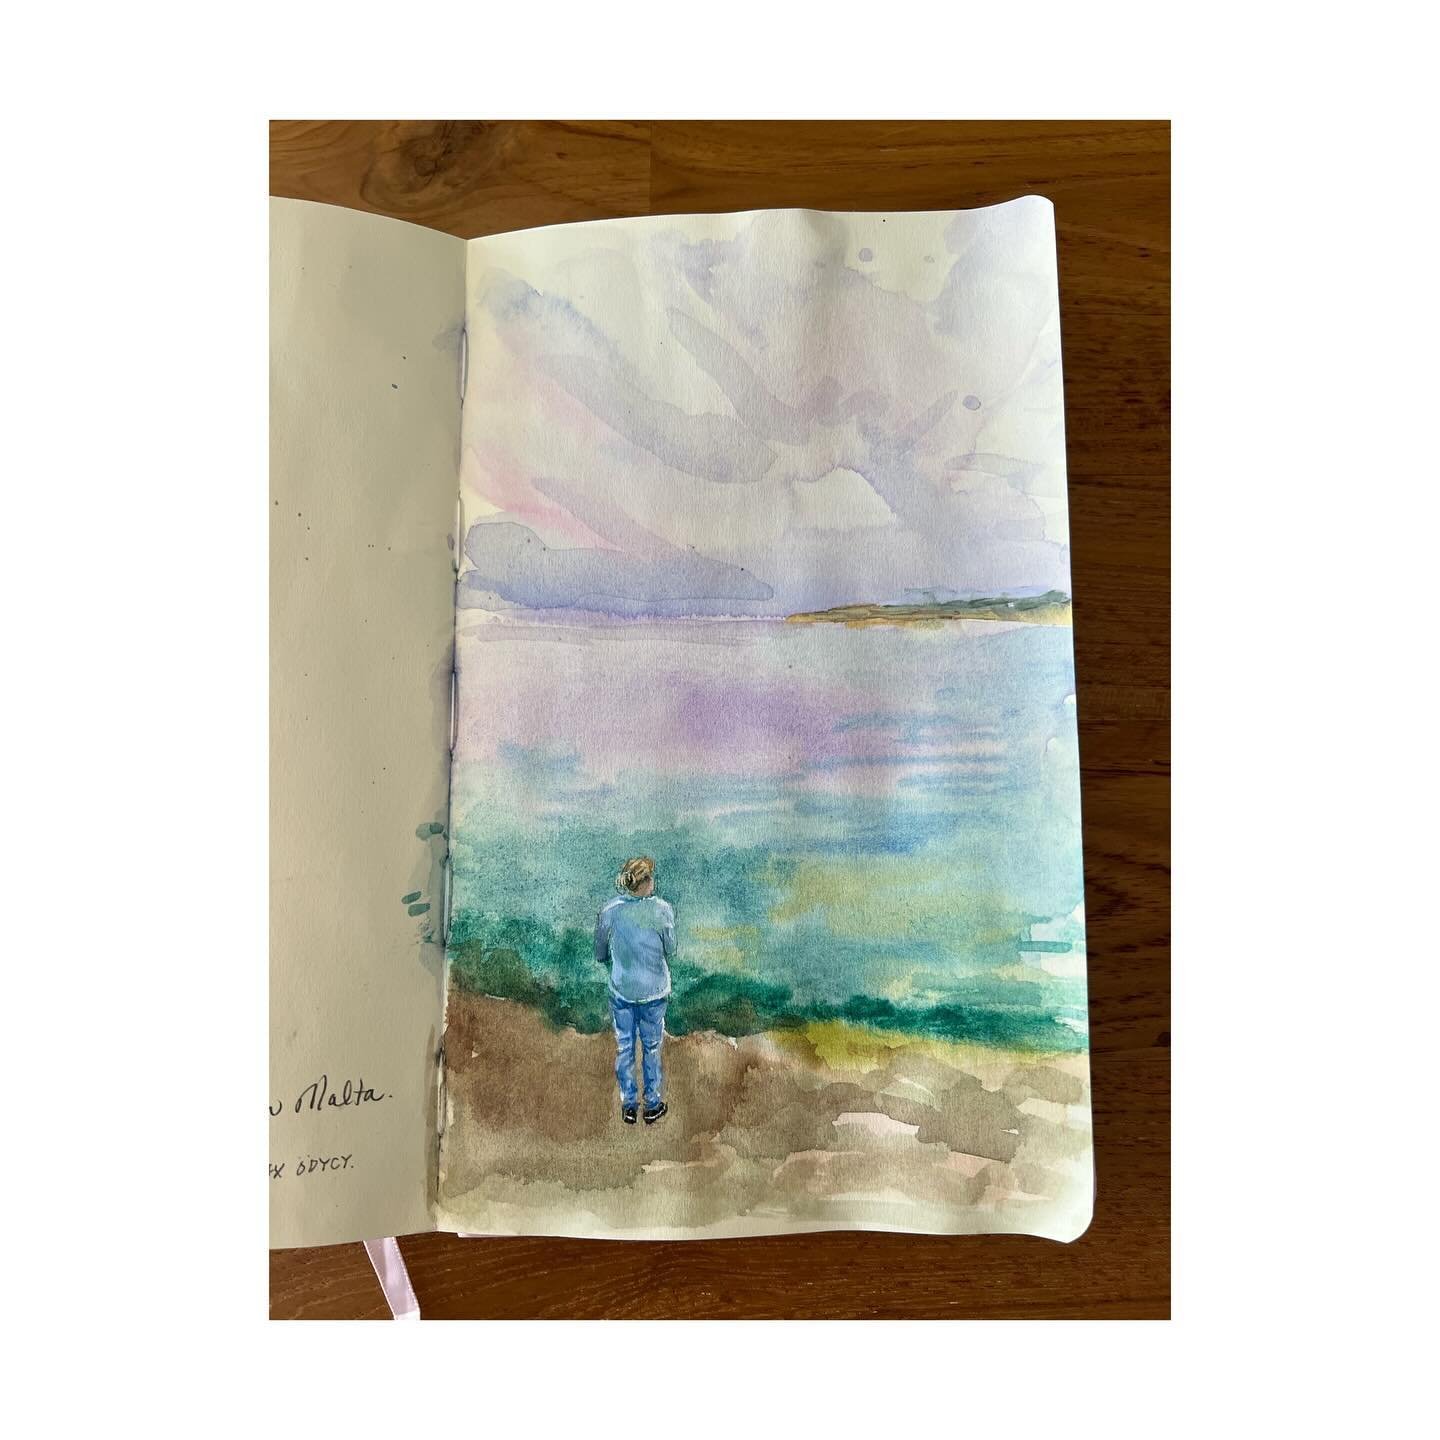 #Travel #sketchbook

I&rsquo;m back on instagram, yay!😅

When I came home from trip to Italy, I couldn&rsquo;t wait to start painting.  I had ideas of making large paintings and doing lots of portrait paintings. Then last week I tripped and fell whi